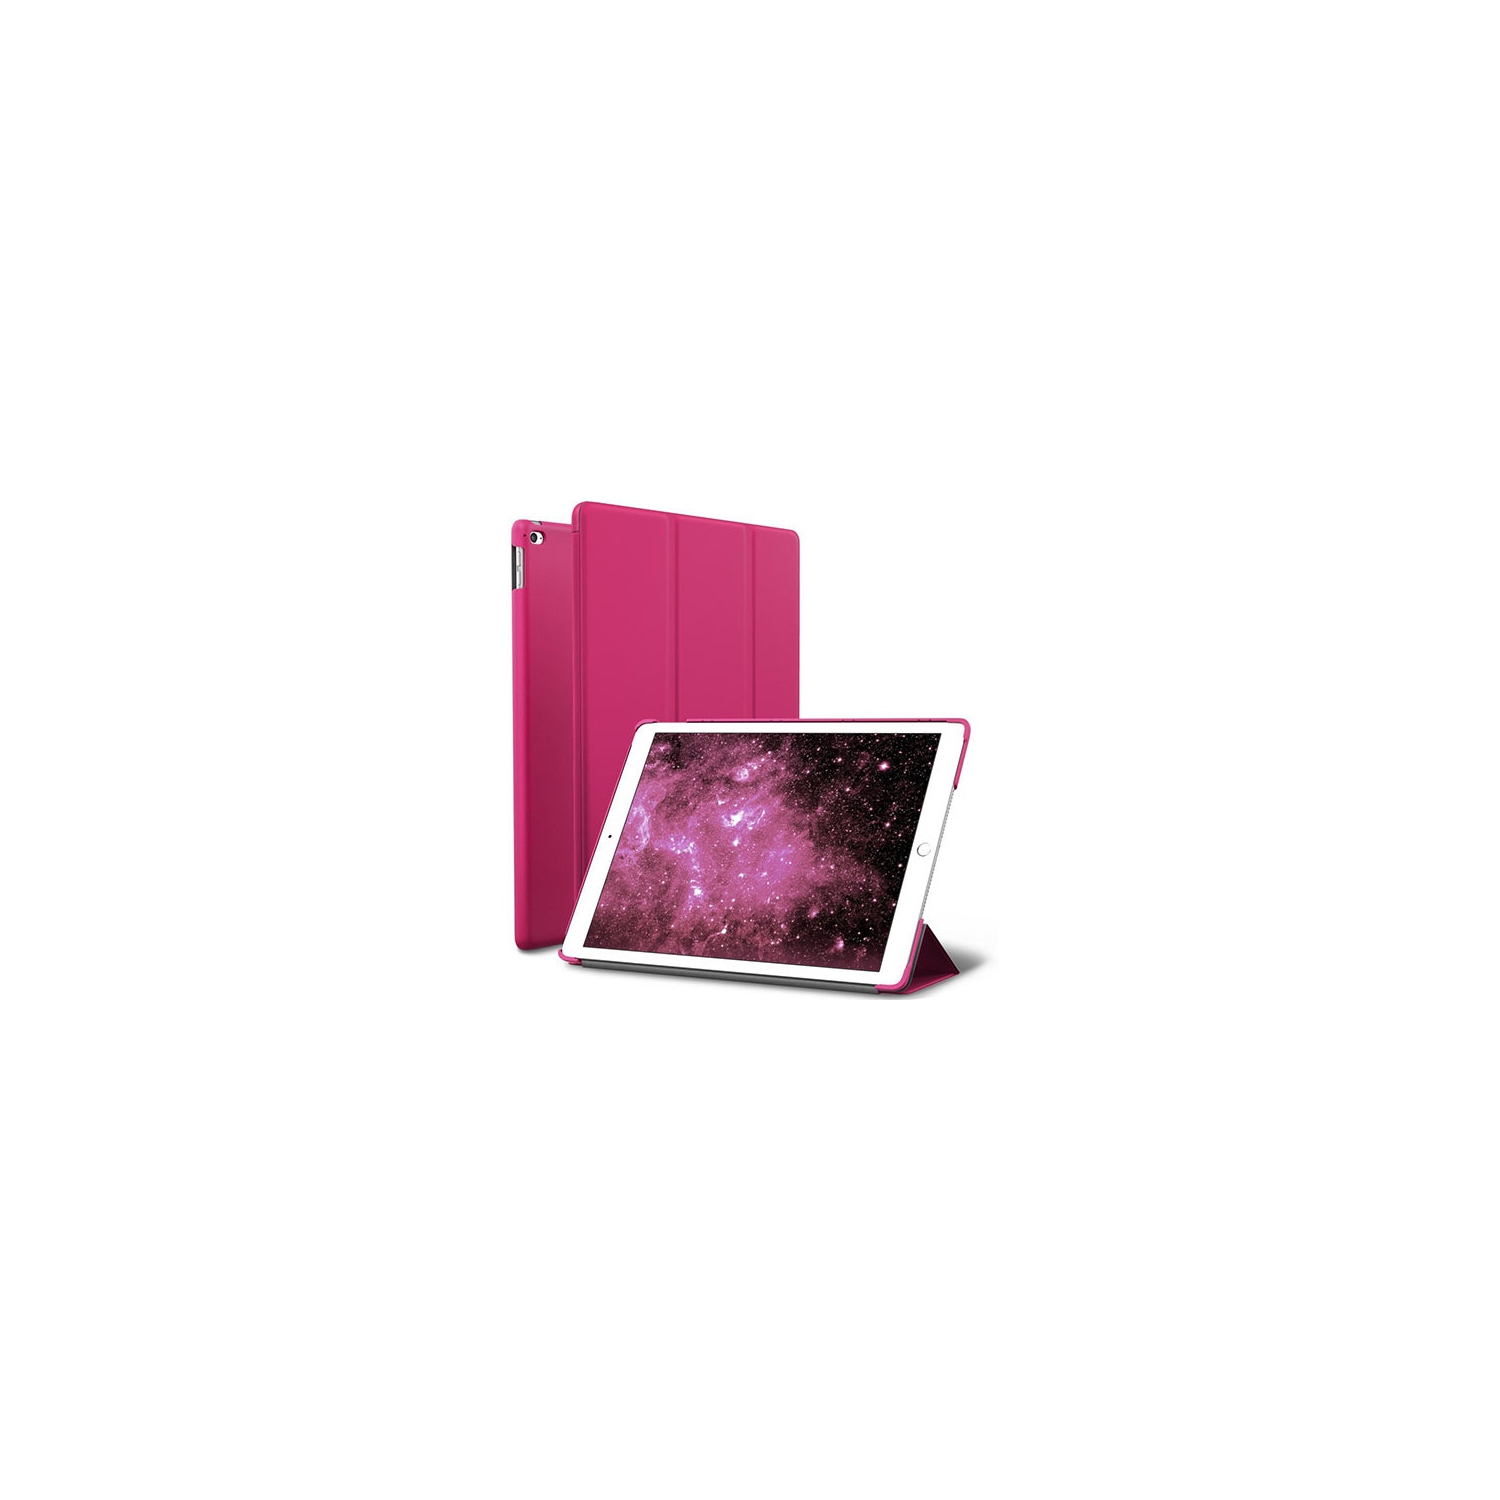 【CSmart】 Slim Magnetic Smart Cover Stand Case for iPad Air 2 2nd Gen. (9.7"), Pink